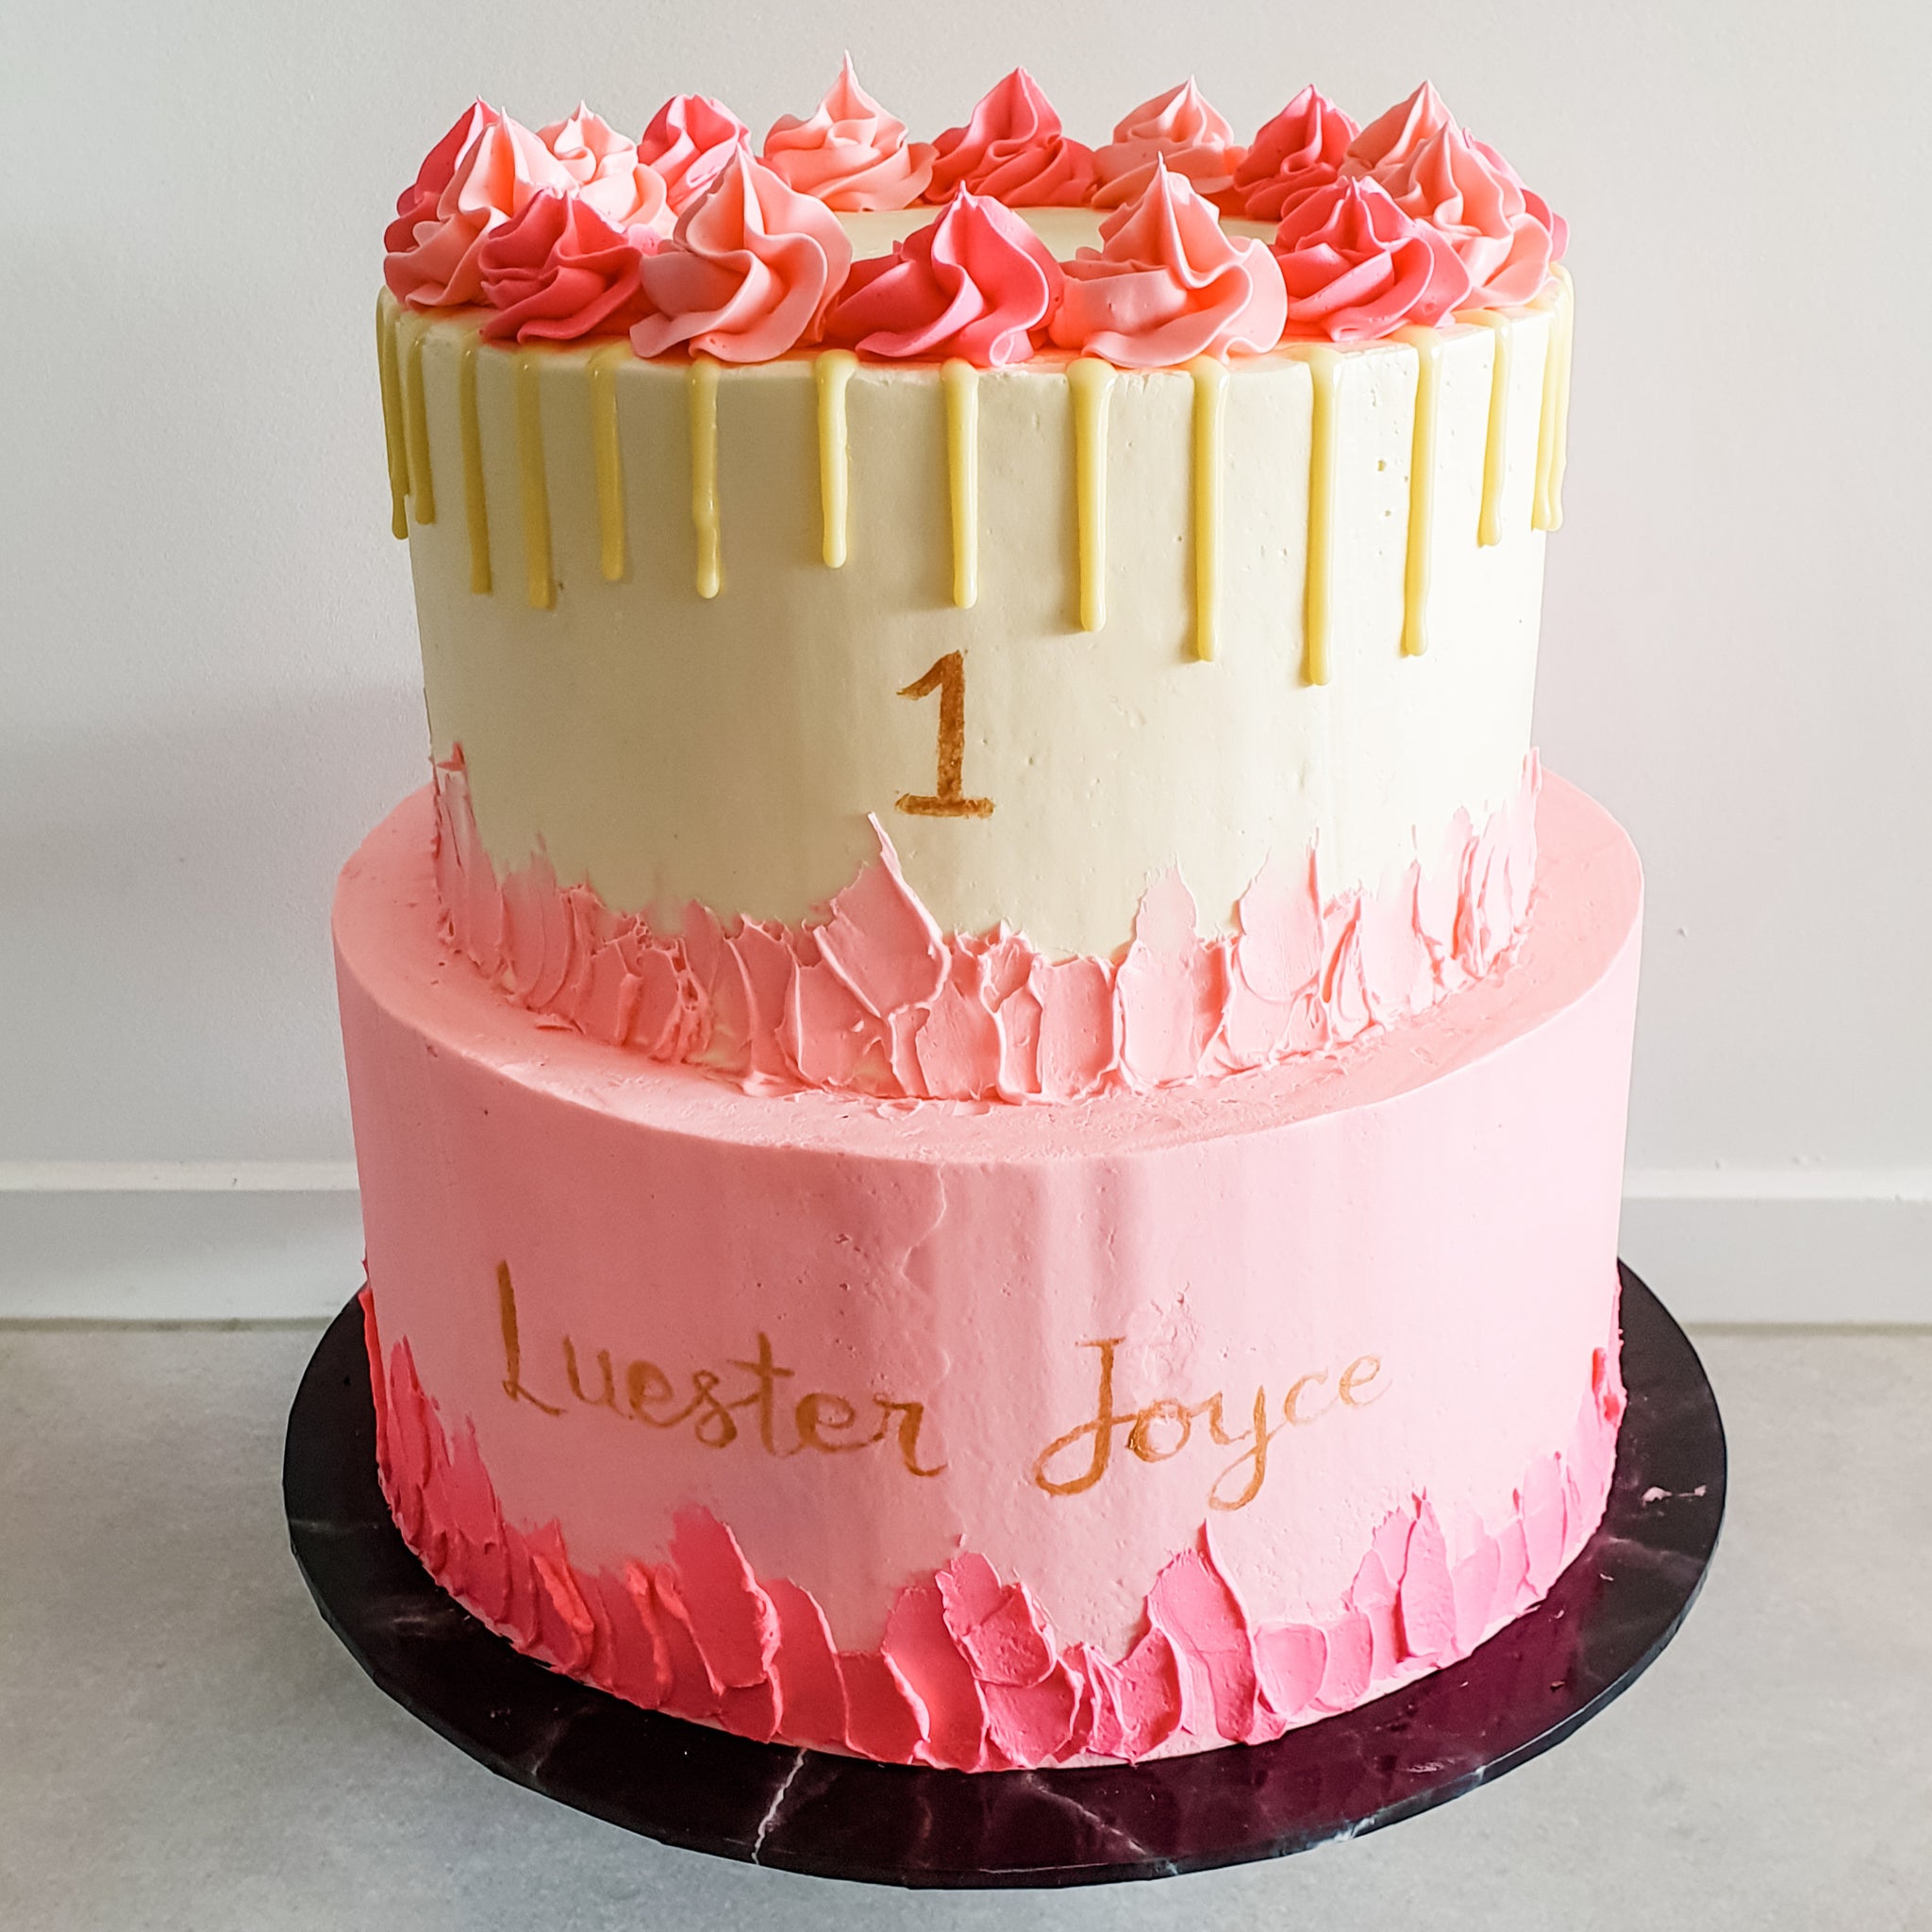 Rose N Truffle 2 Tier Cake - Buy, Send & Order Online Delivery In India -  Cake2homes